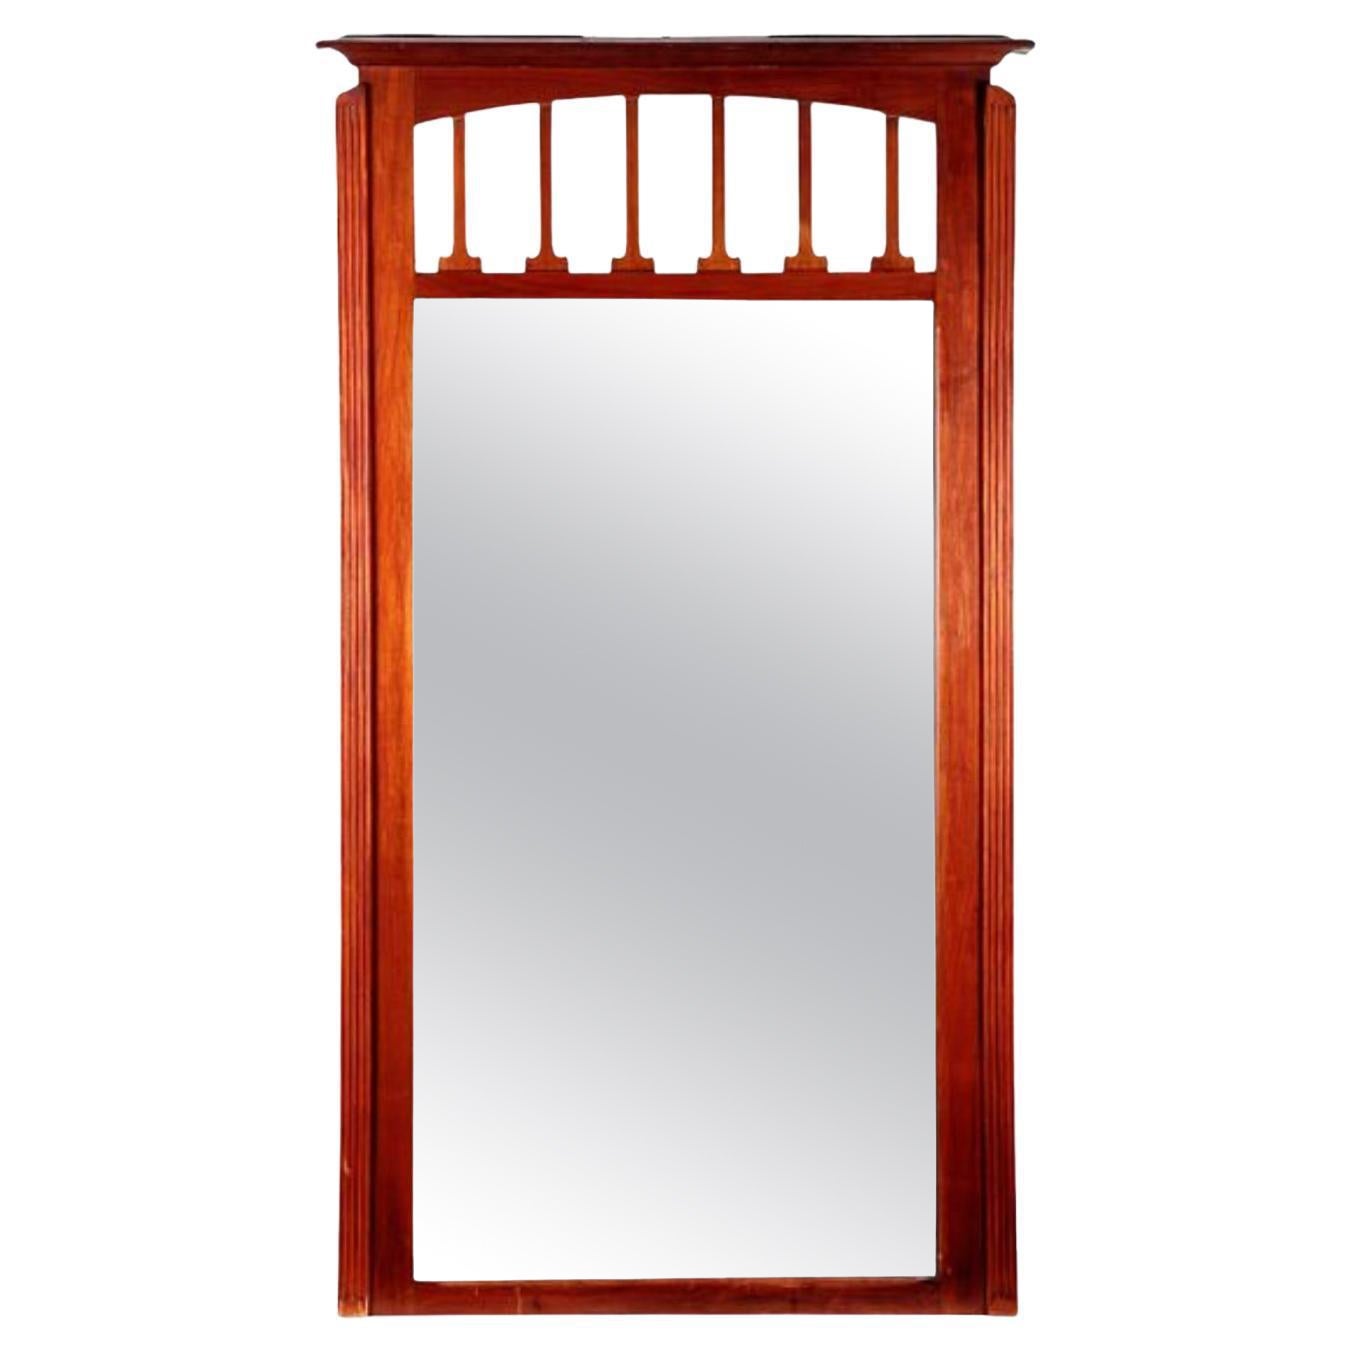 Large French Mahogany Wall Mirror by Maison Koenig, Liège, 1895 For Sale